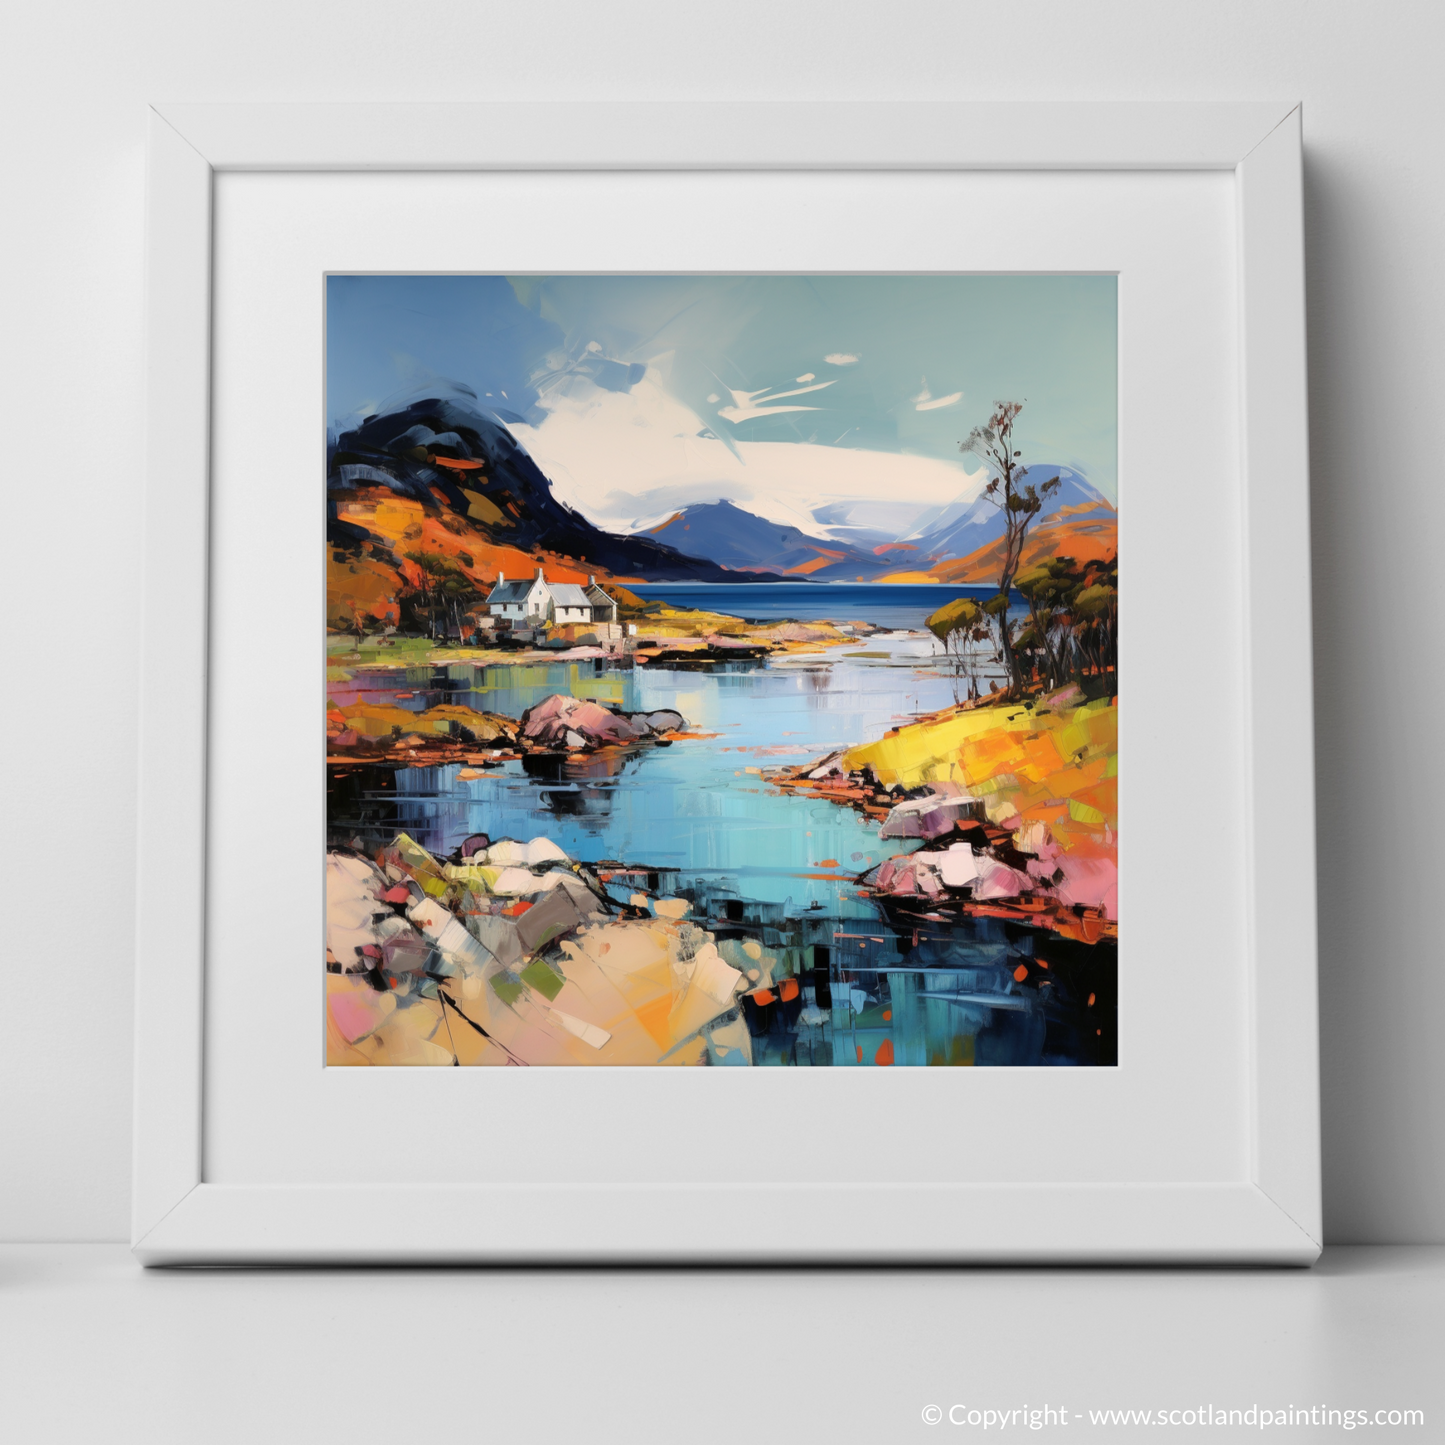 Art Print of Shieldaig Bay, Wester Ross with a white frame